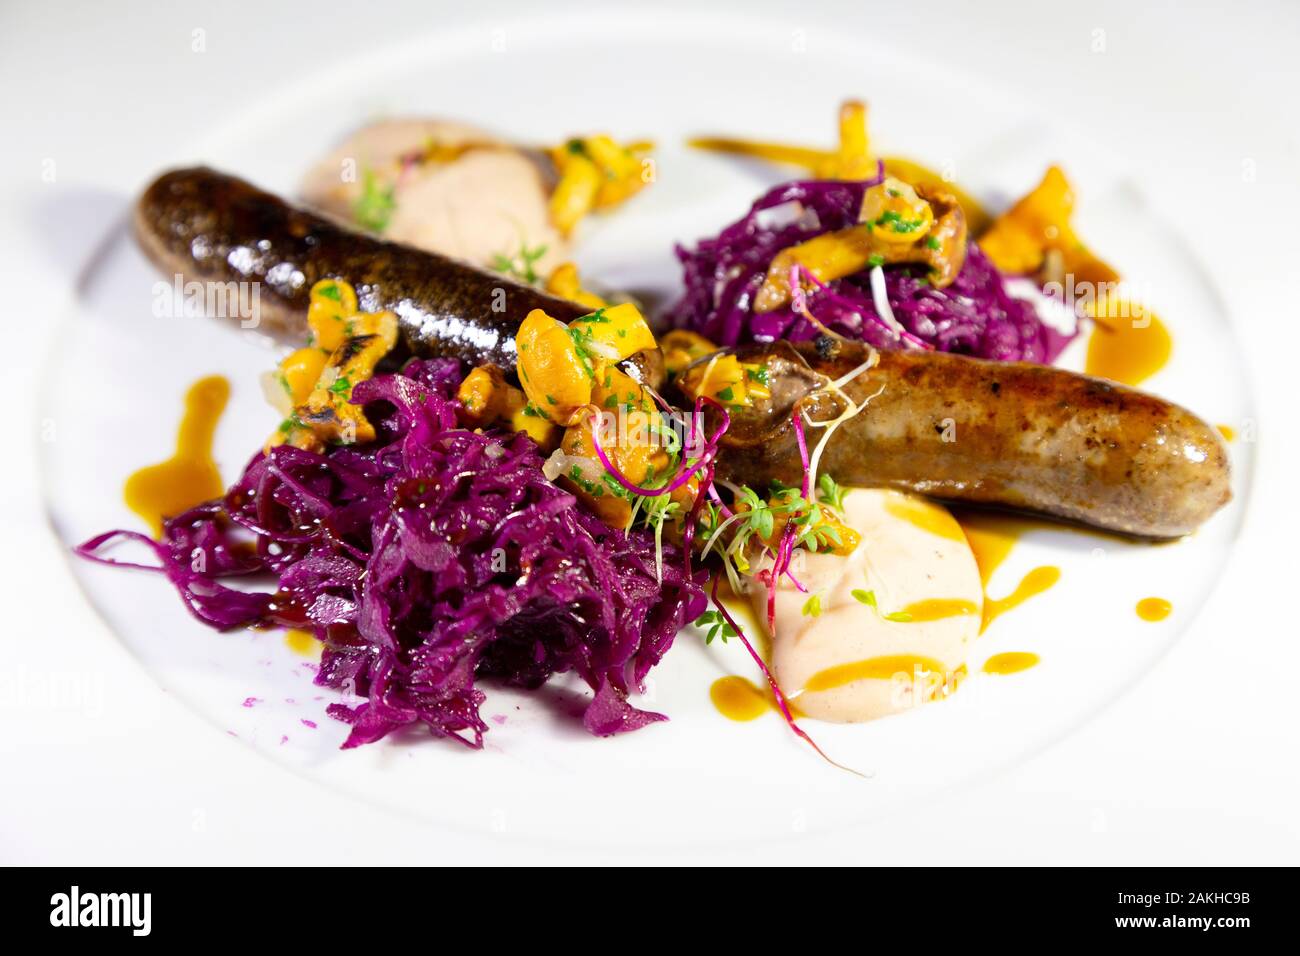 Grilled bratwurst style sausage served at Zell am See, Austria.  It is accompanied by red cabbage and seasonal vegetables. Stock Photo